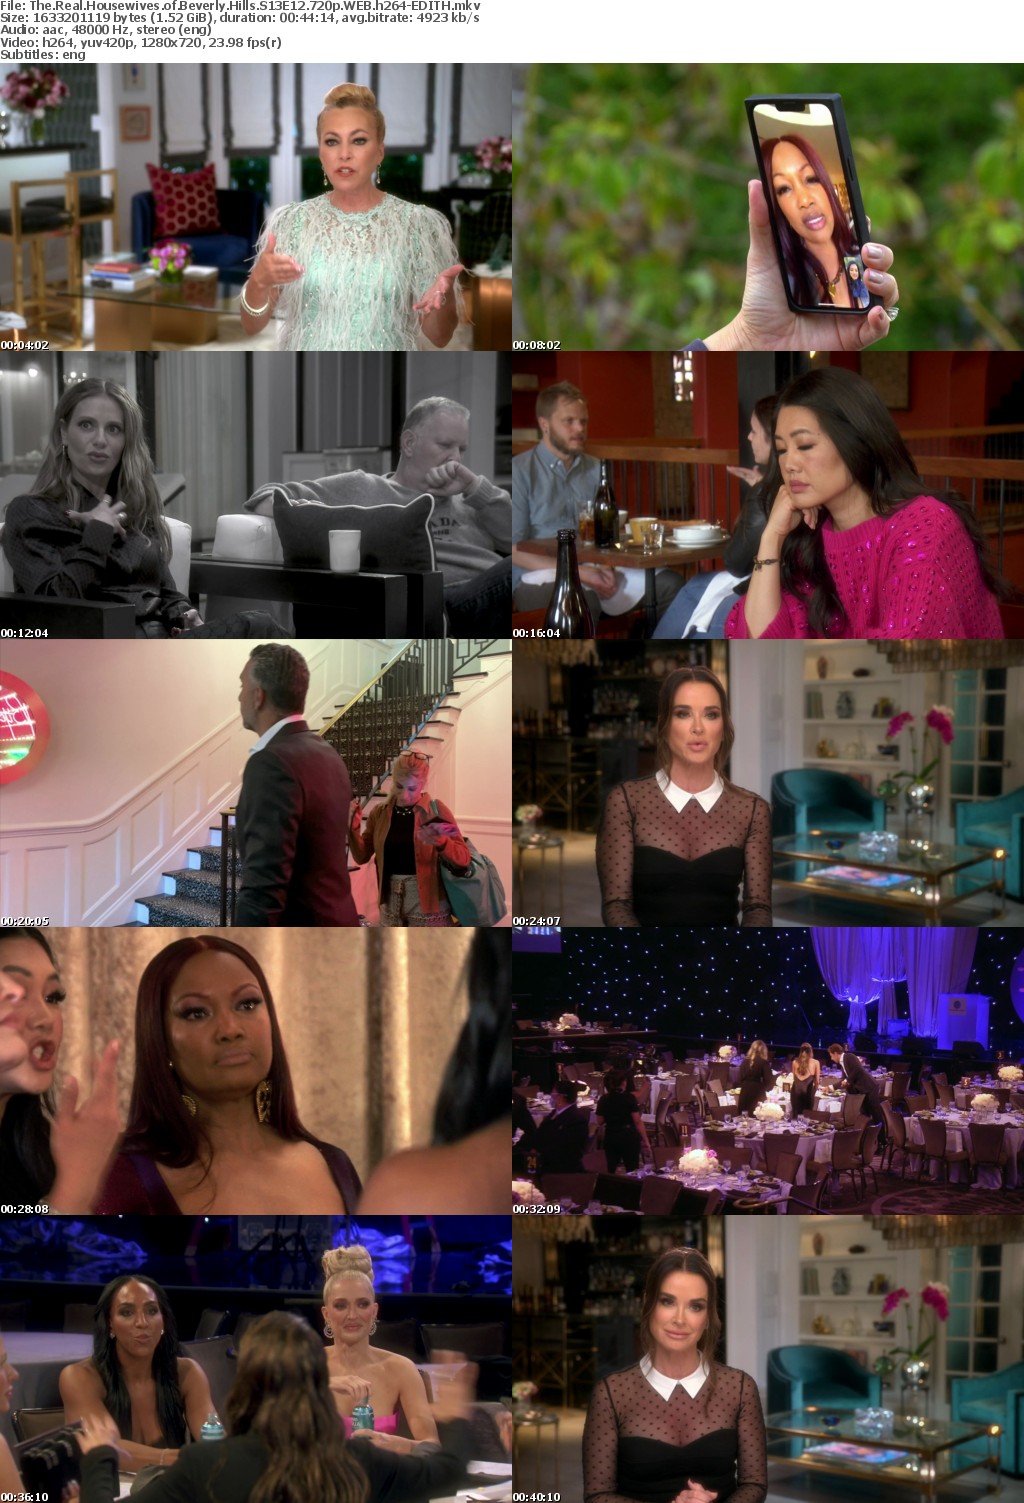 The Real Housewives of Beverly Hills S13E12 720p WEB h264-EDITH